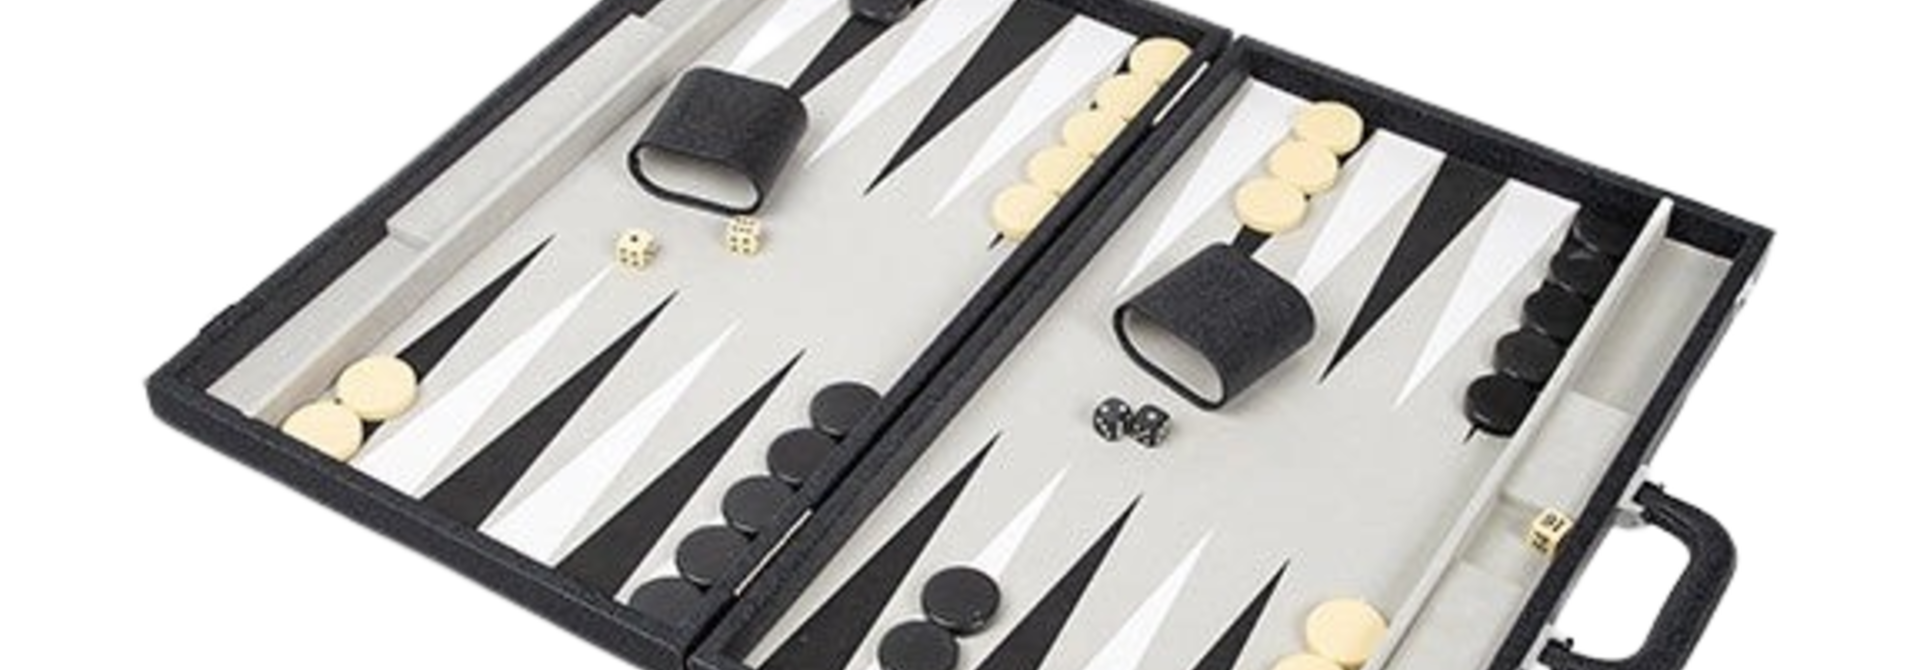 Onyx Backgammon Set | The Game Collection, Black - 21 Inch x 12.5 Inch x 2.5 Inch